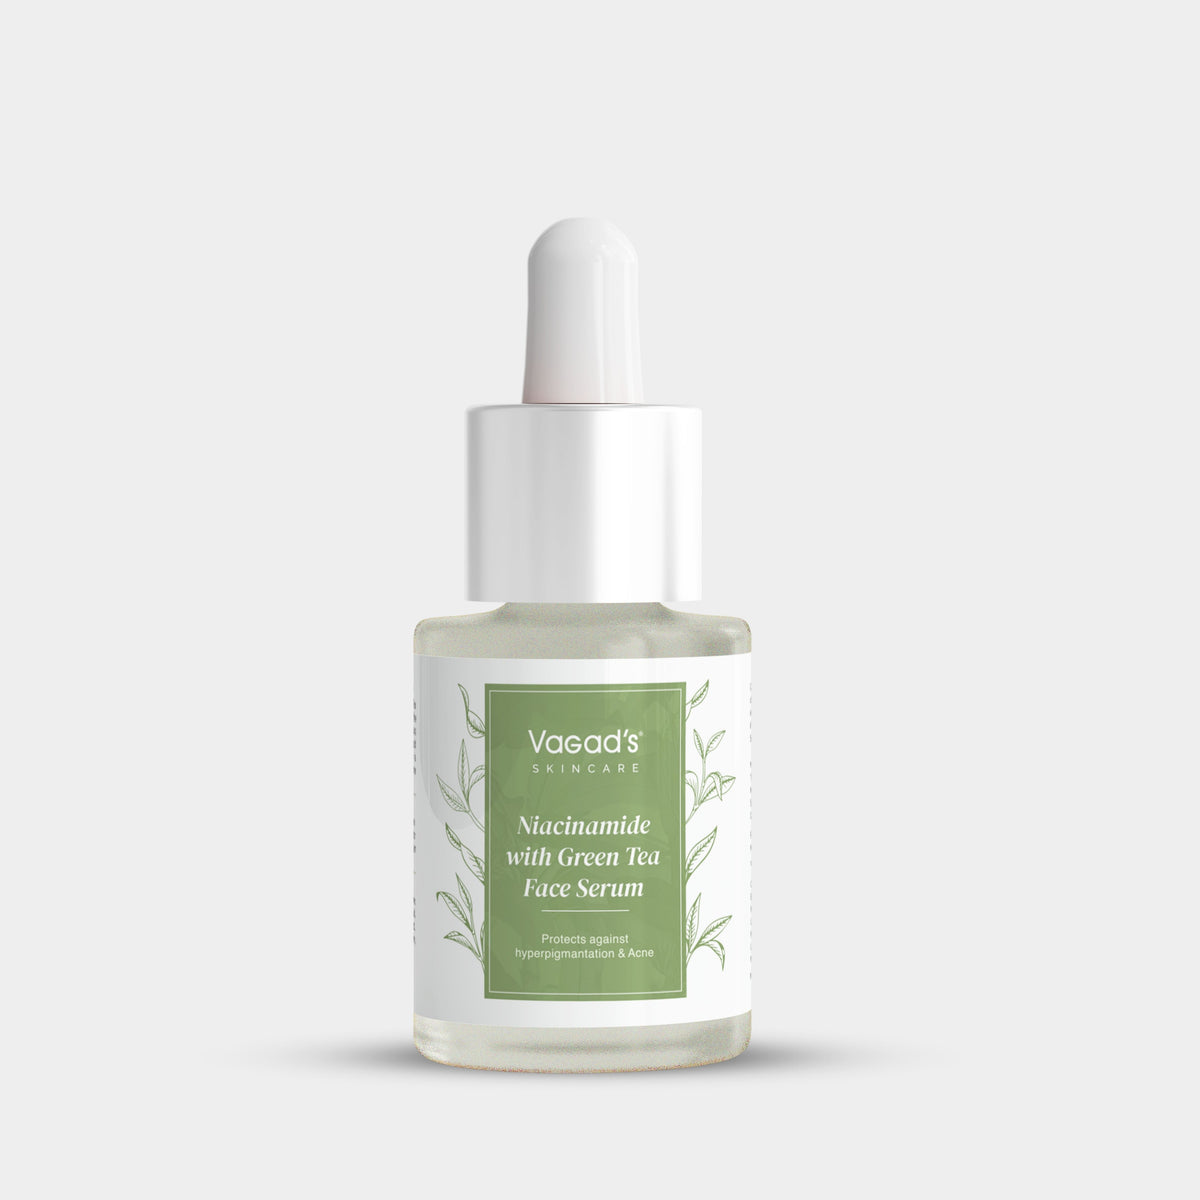 5% Niacinamide with Green Tea Face Serum for hyperpigmentation, blemishes and acne, 30ml